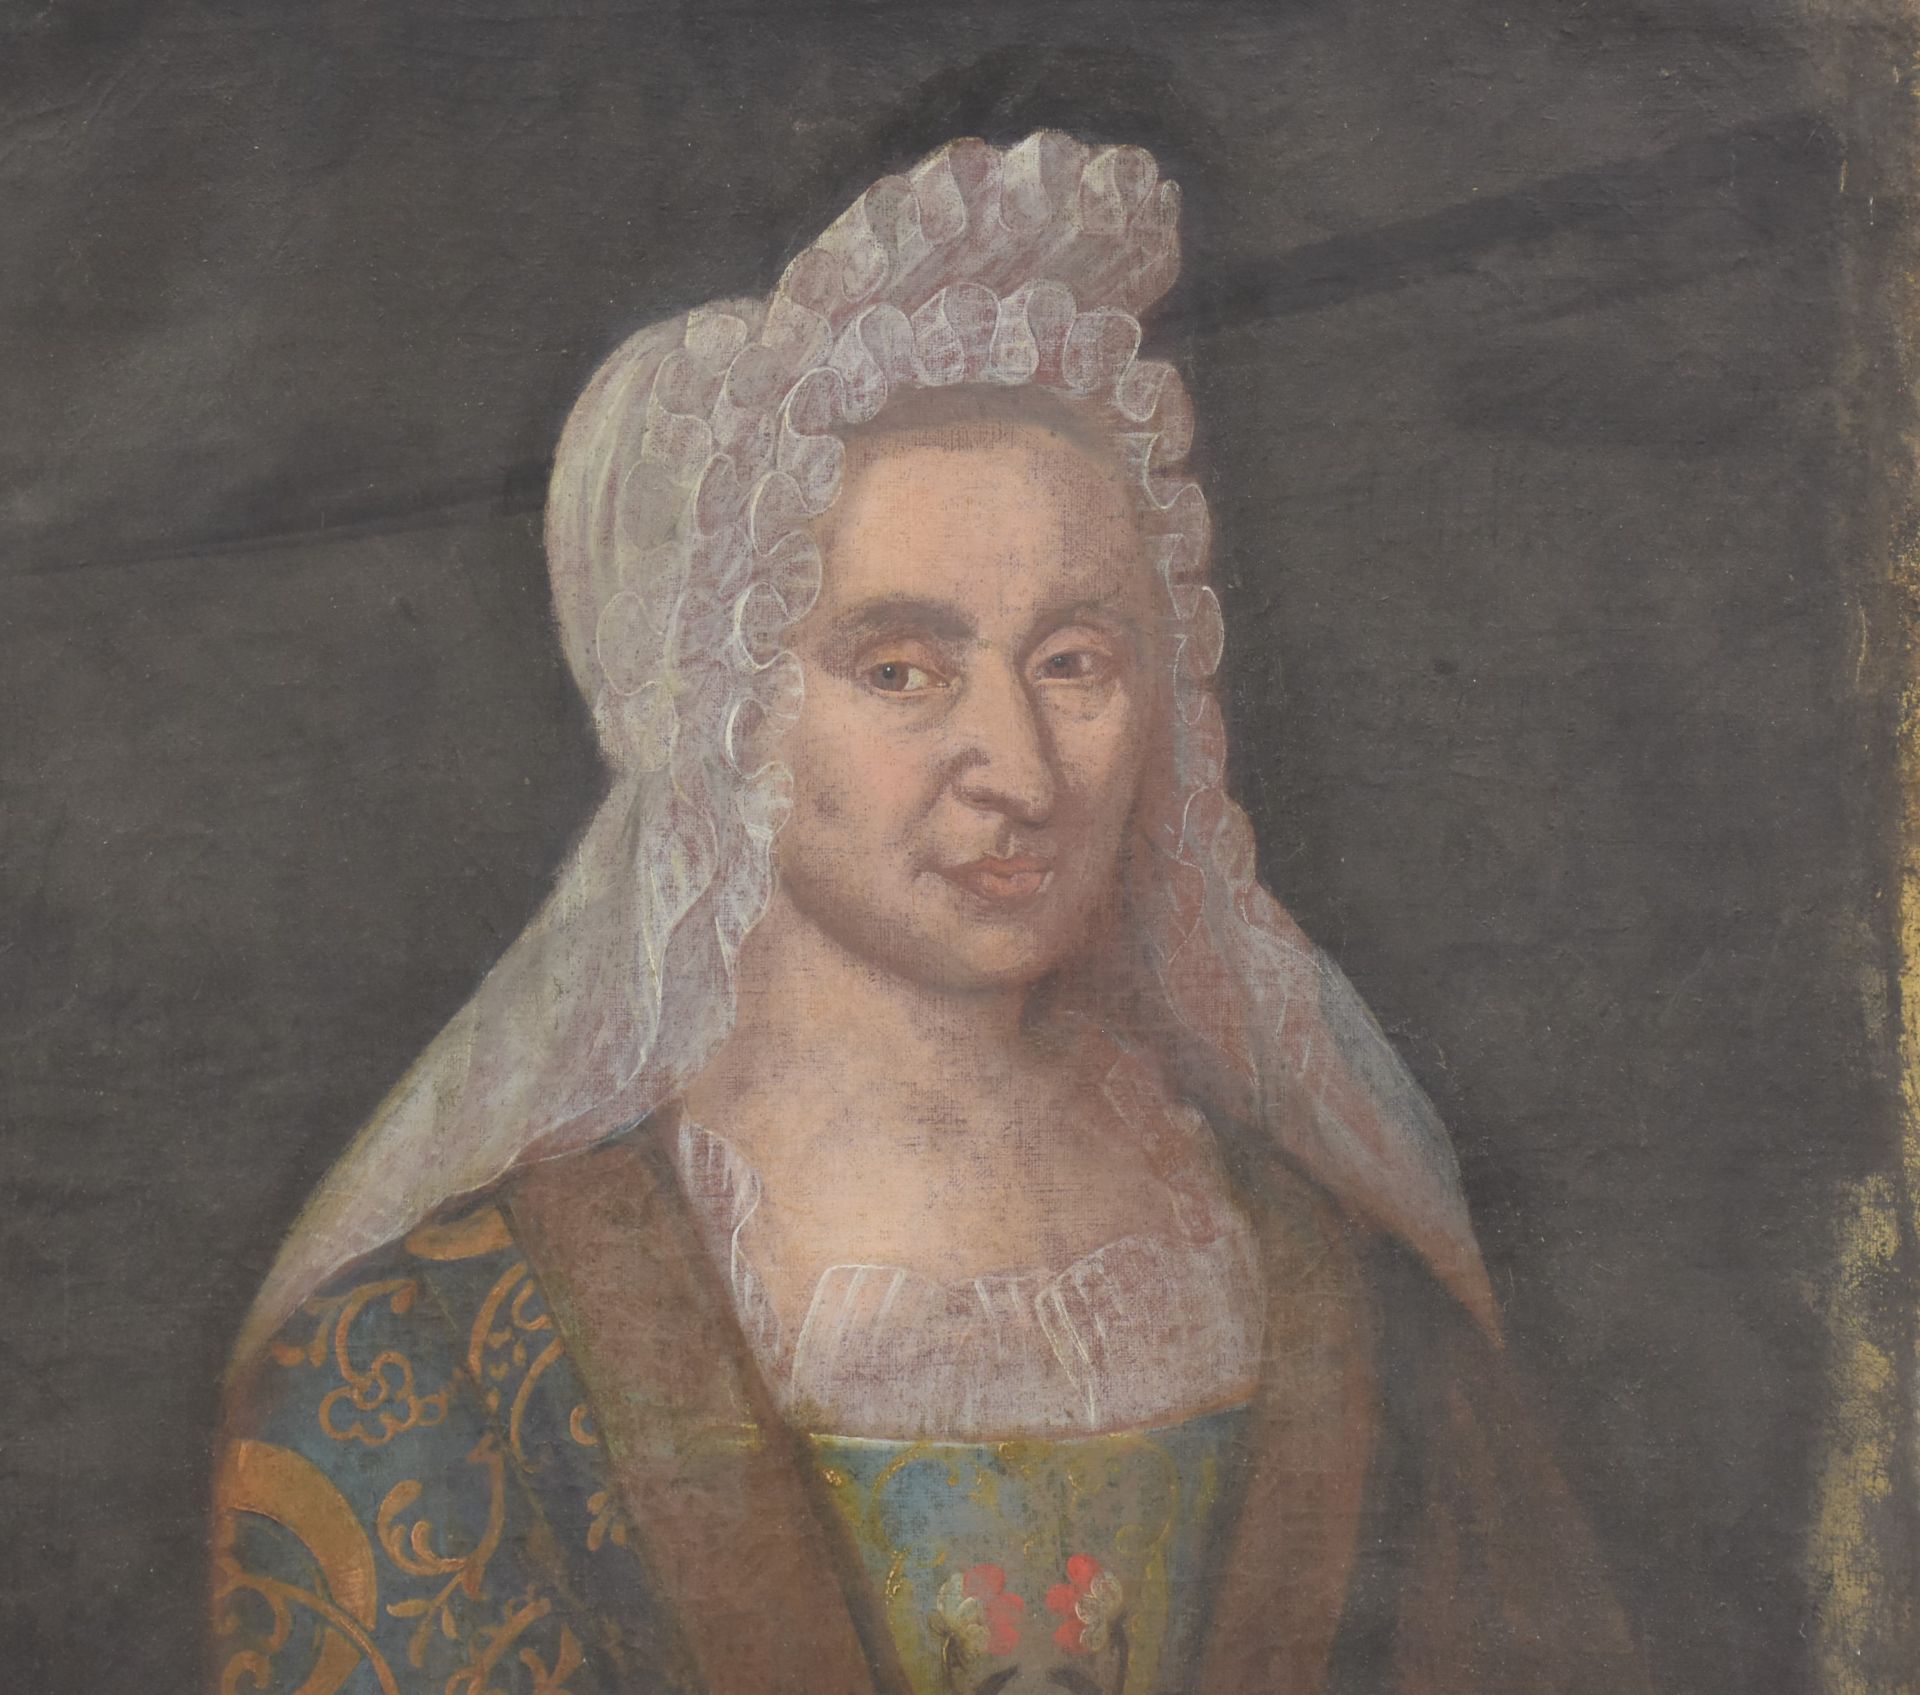 18th century portrait of the widow Pinondel, mother of 15 children, aged 49 and a half in the year 1 - Image 3 of 4